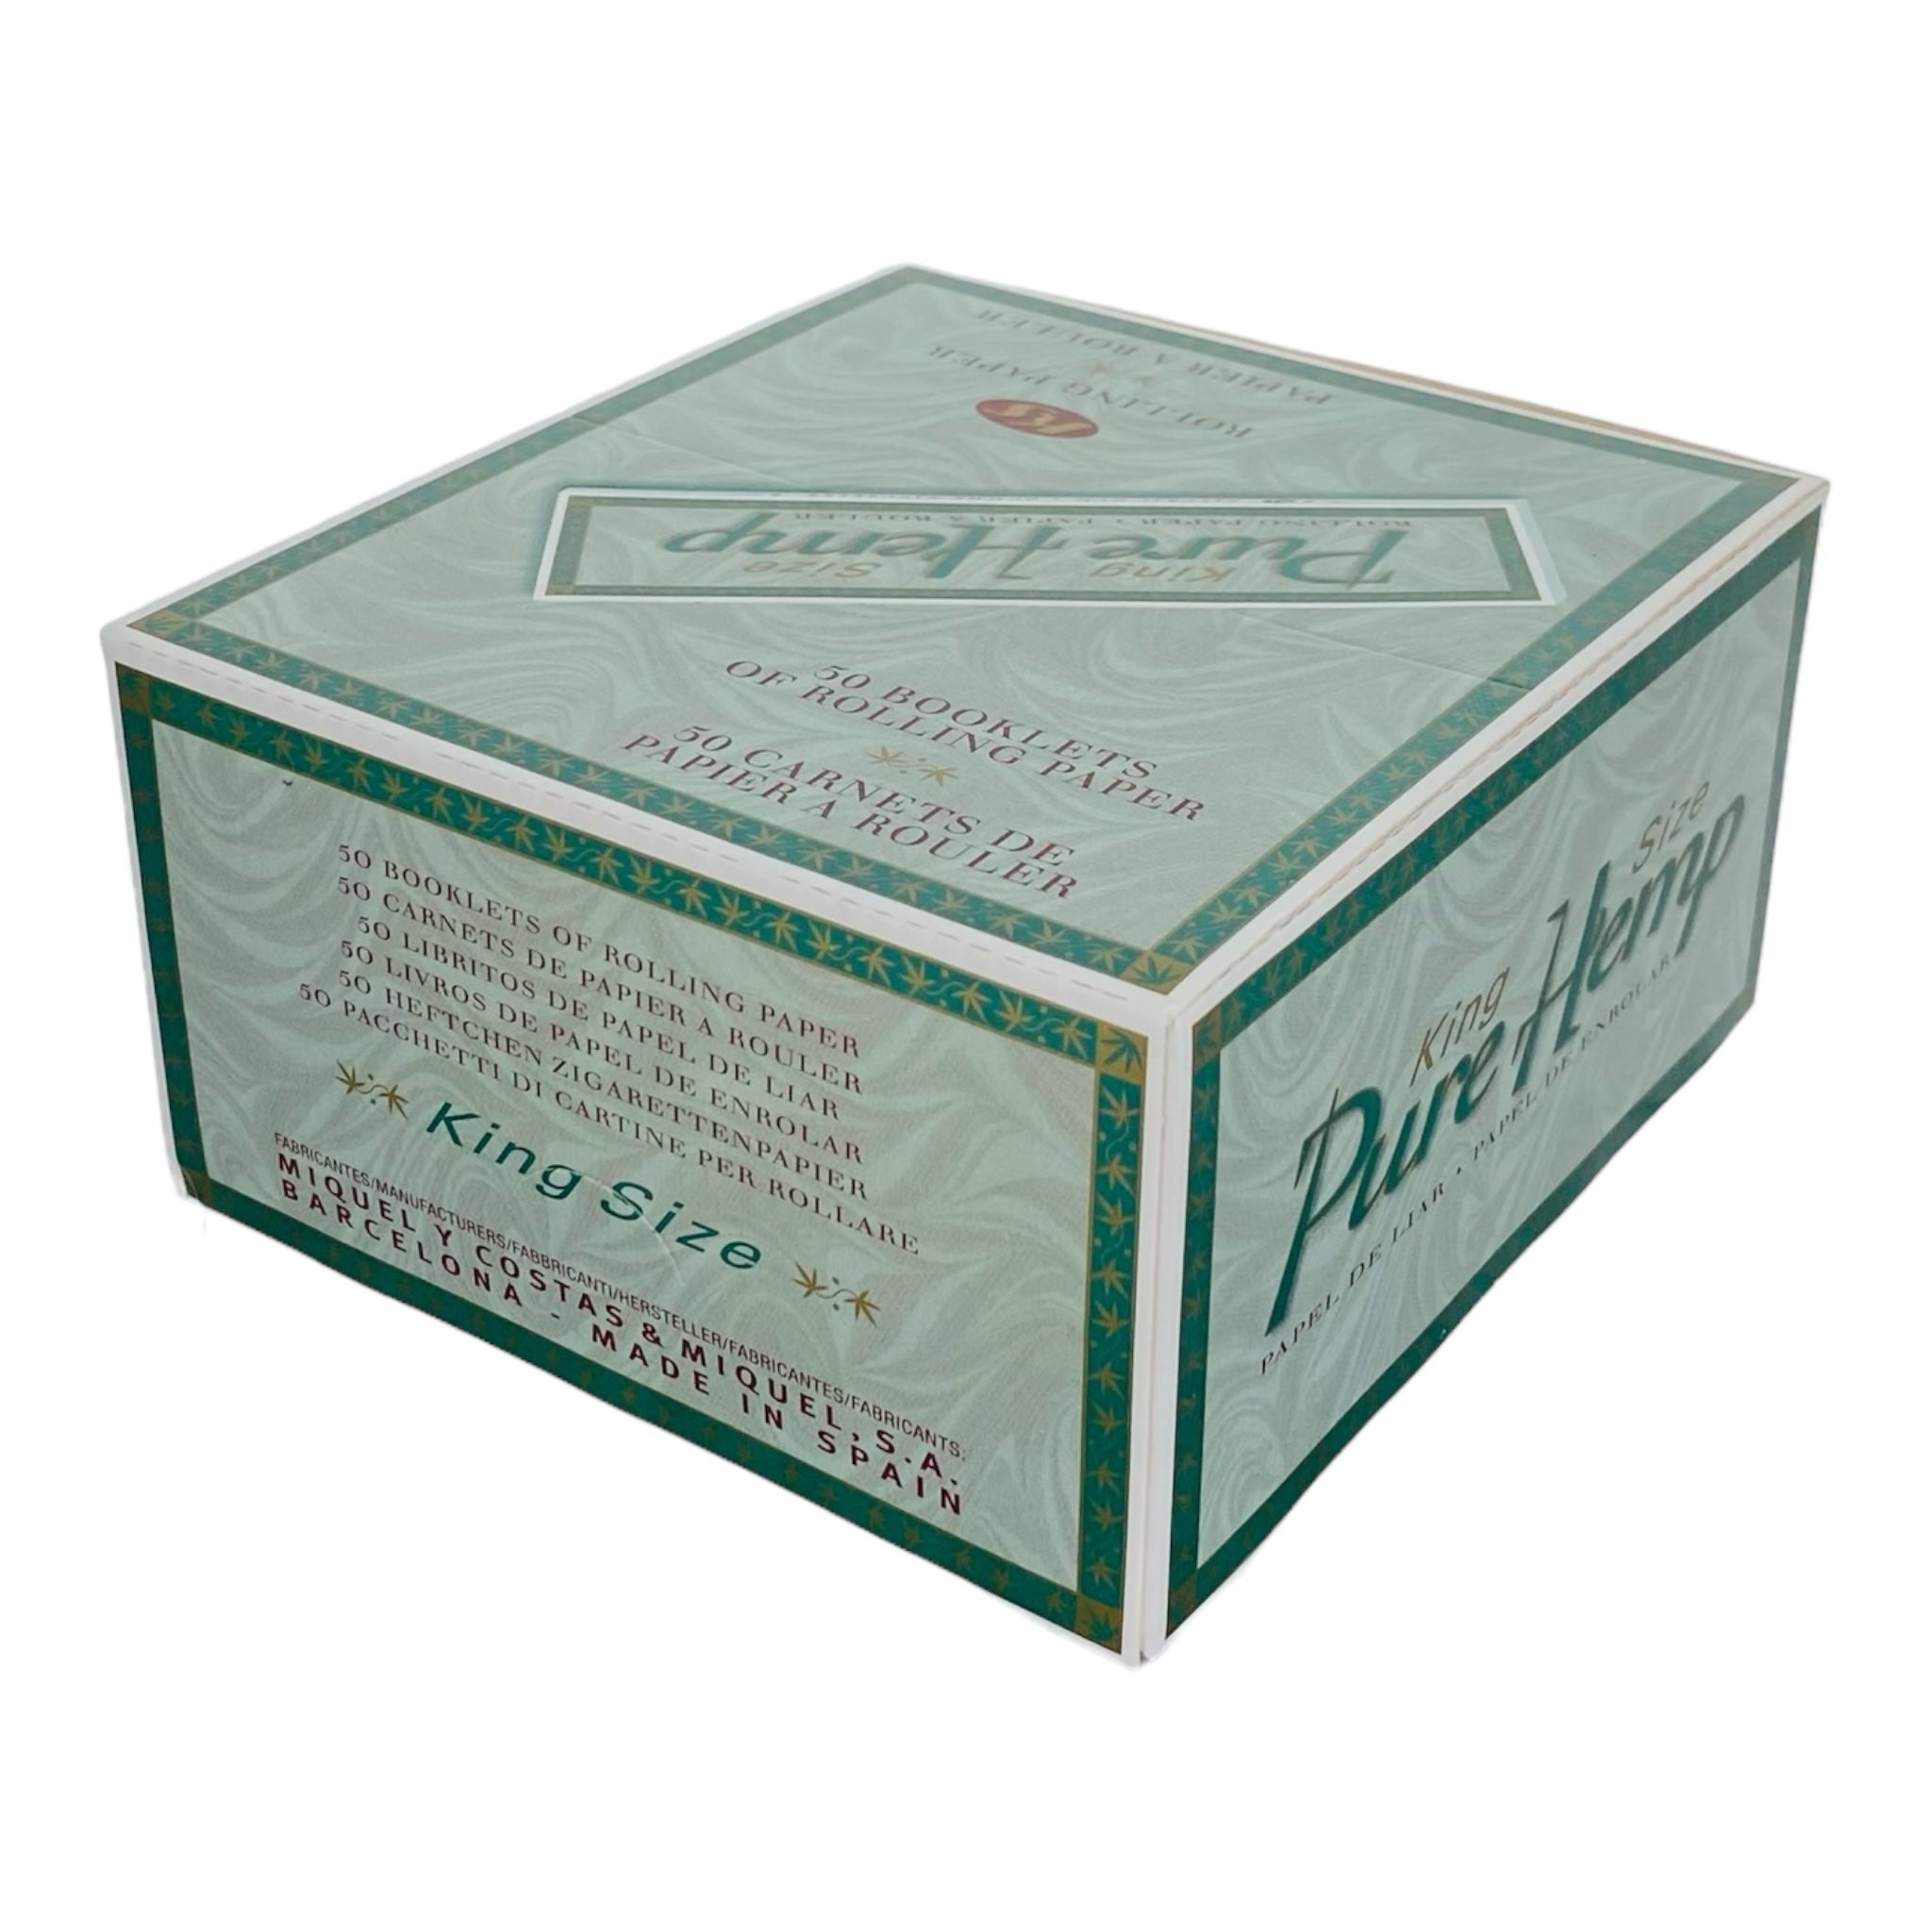 Pure Hemp King Size Rolling Papers BOX - 50 packs -